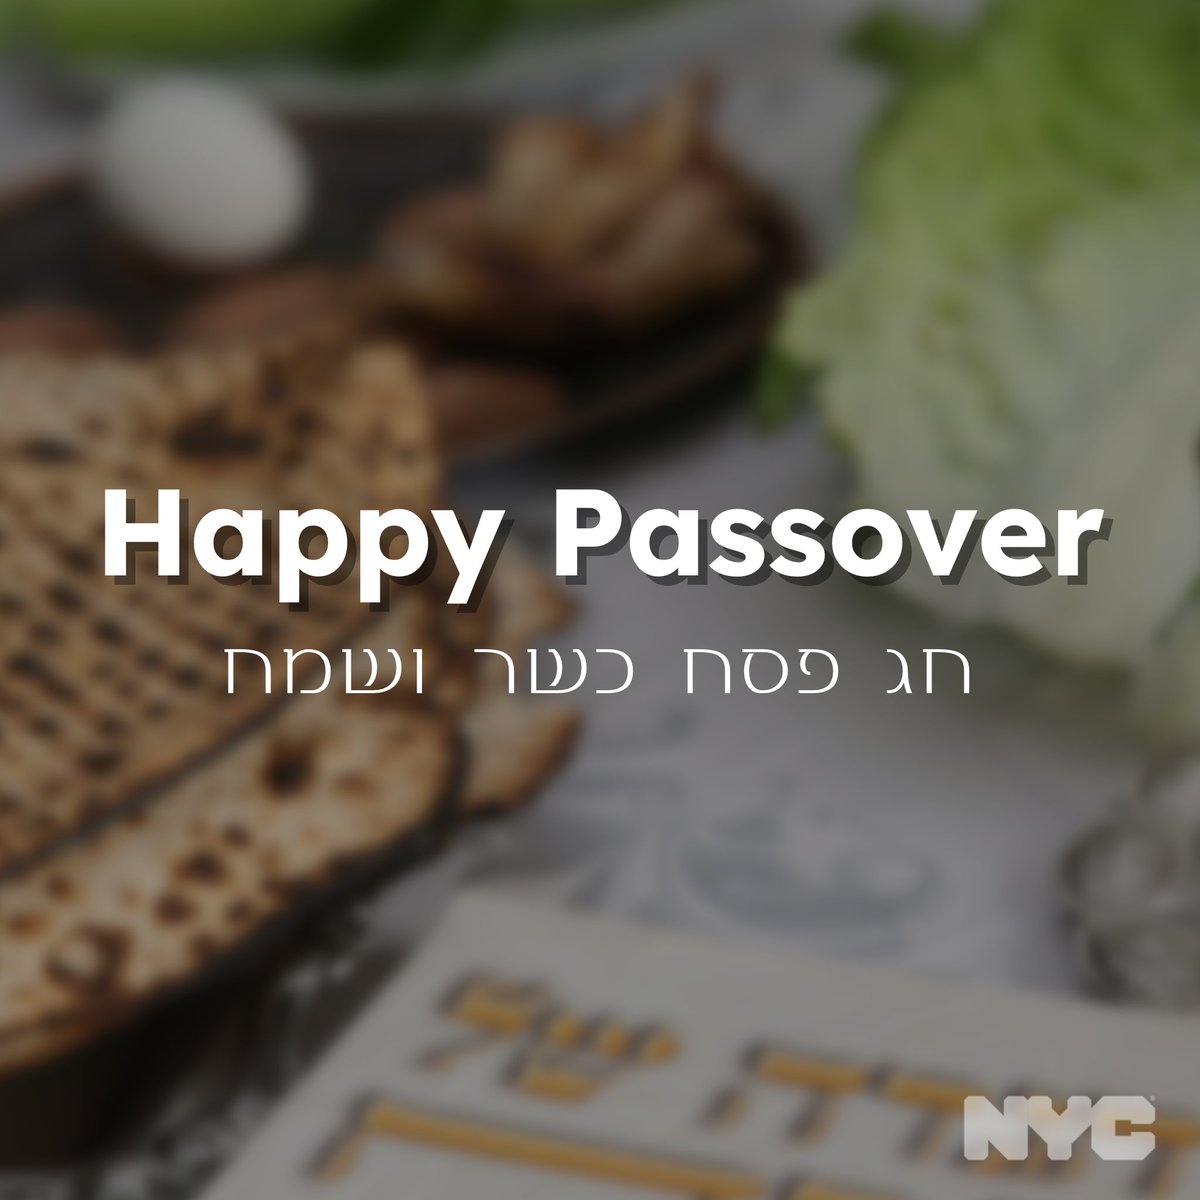 Happy #Passover to all those celebrating in New York City! We want to wish our Jewish community a peaceful and joyous holiday with their loved ones.